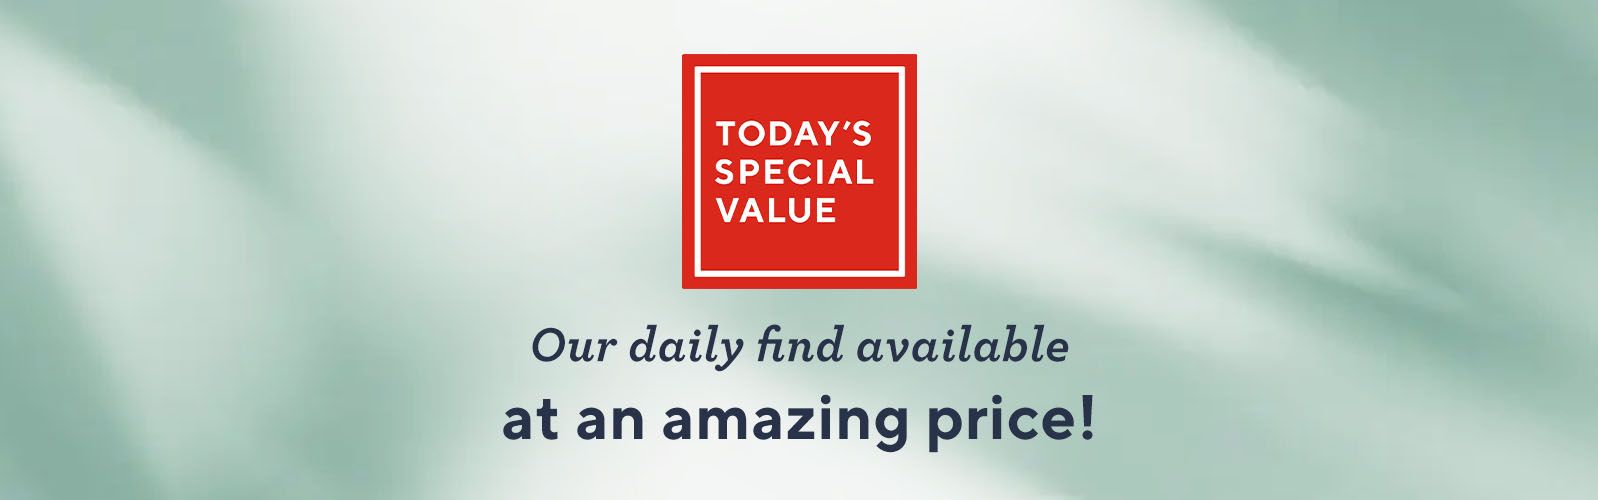 Today's Special Value